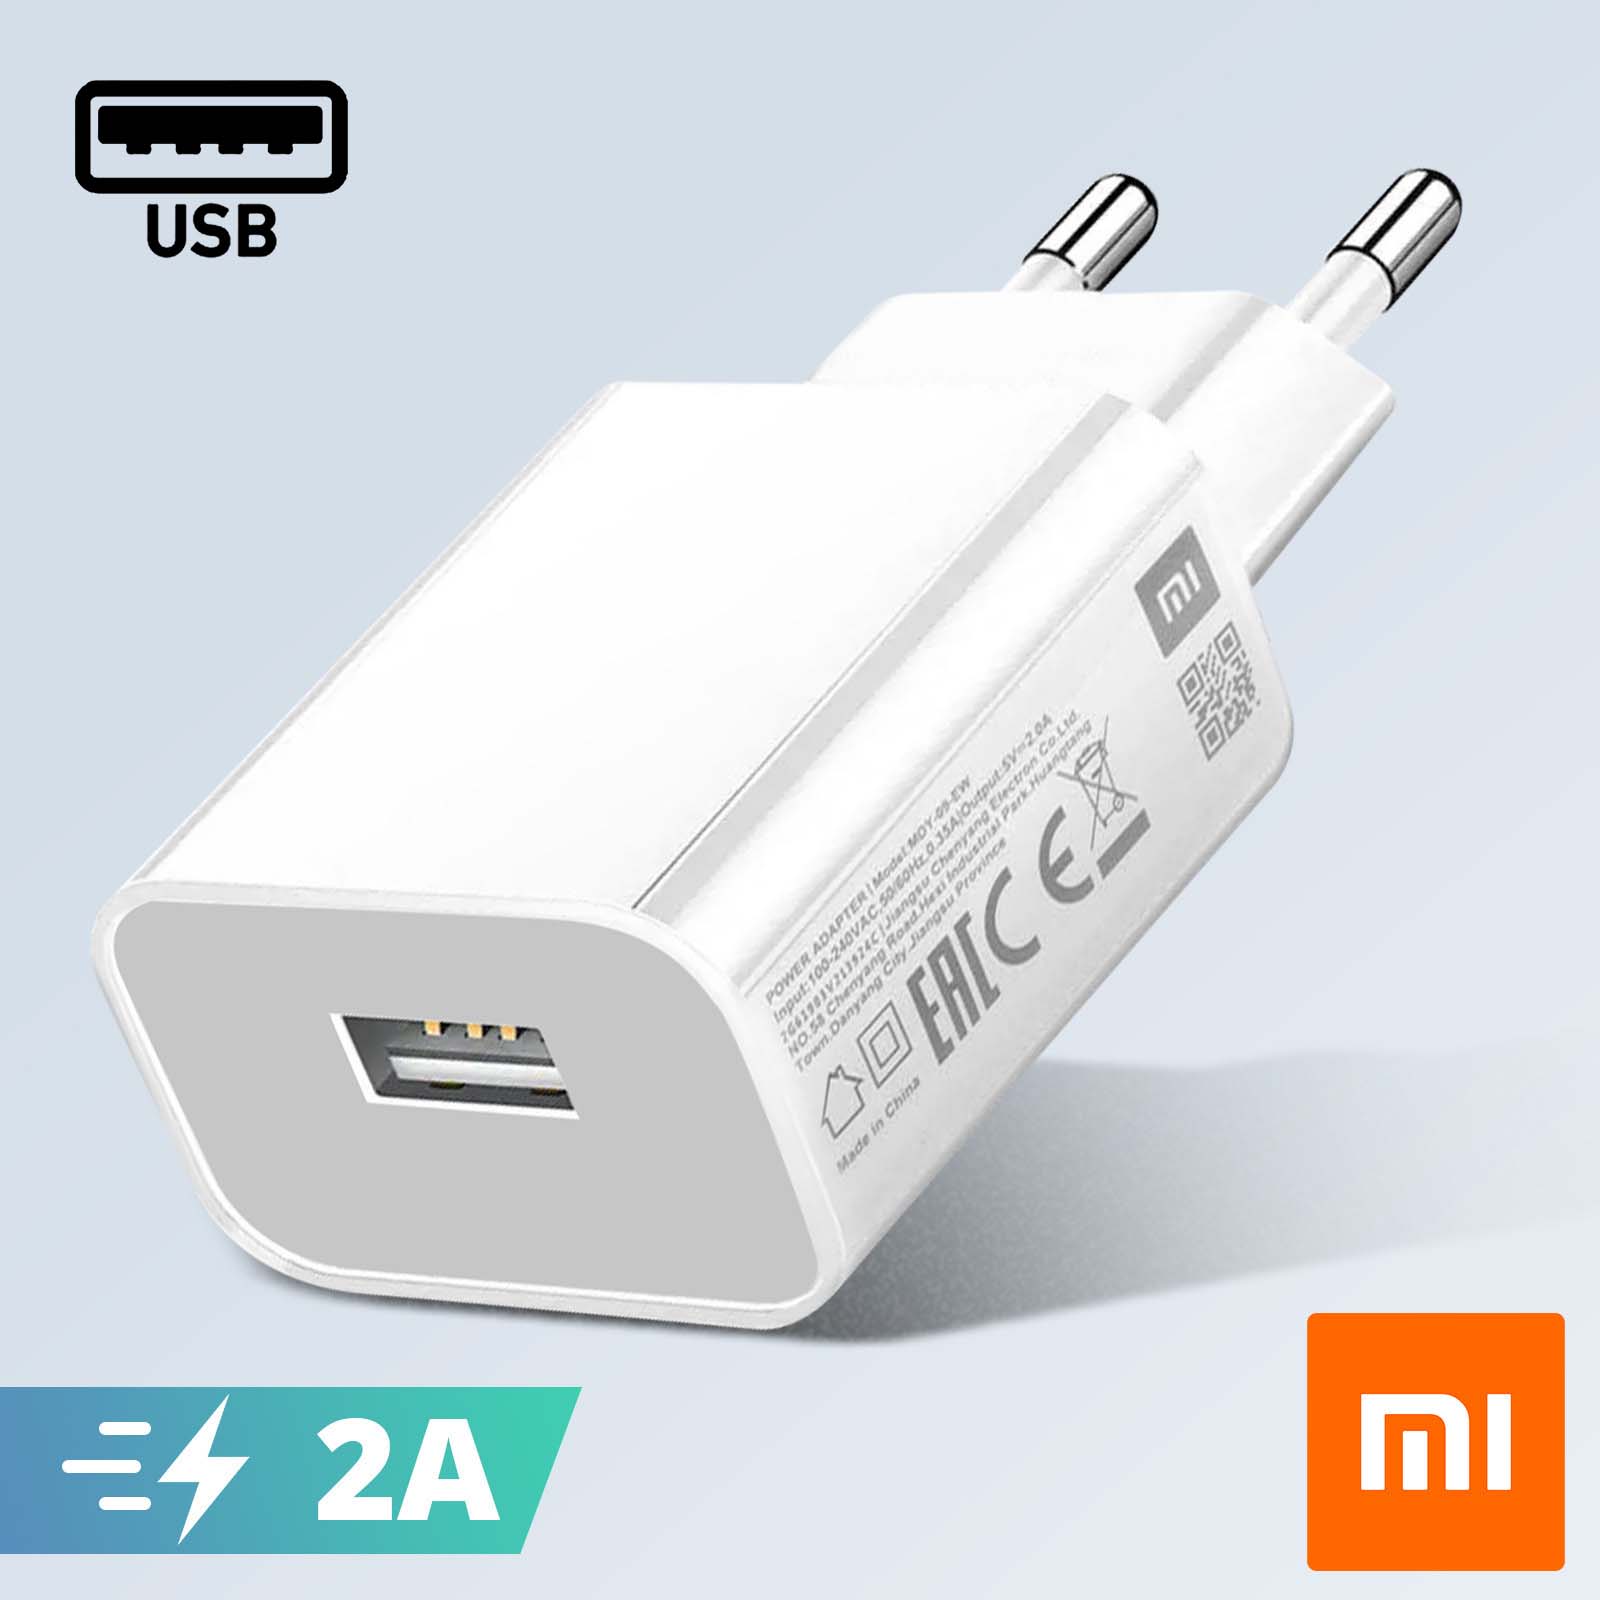 Chargeur secteur VISIODIRECT Chargeur pour Huawei P smart 2020